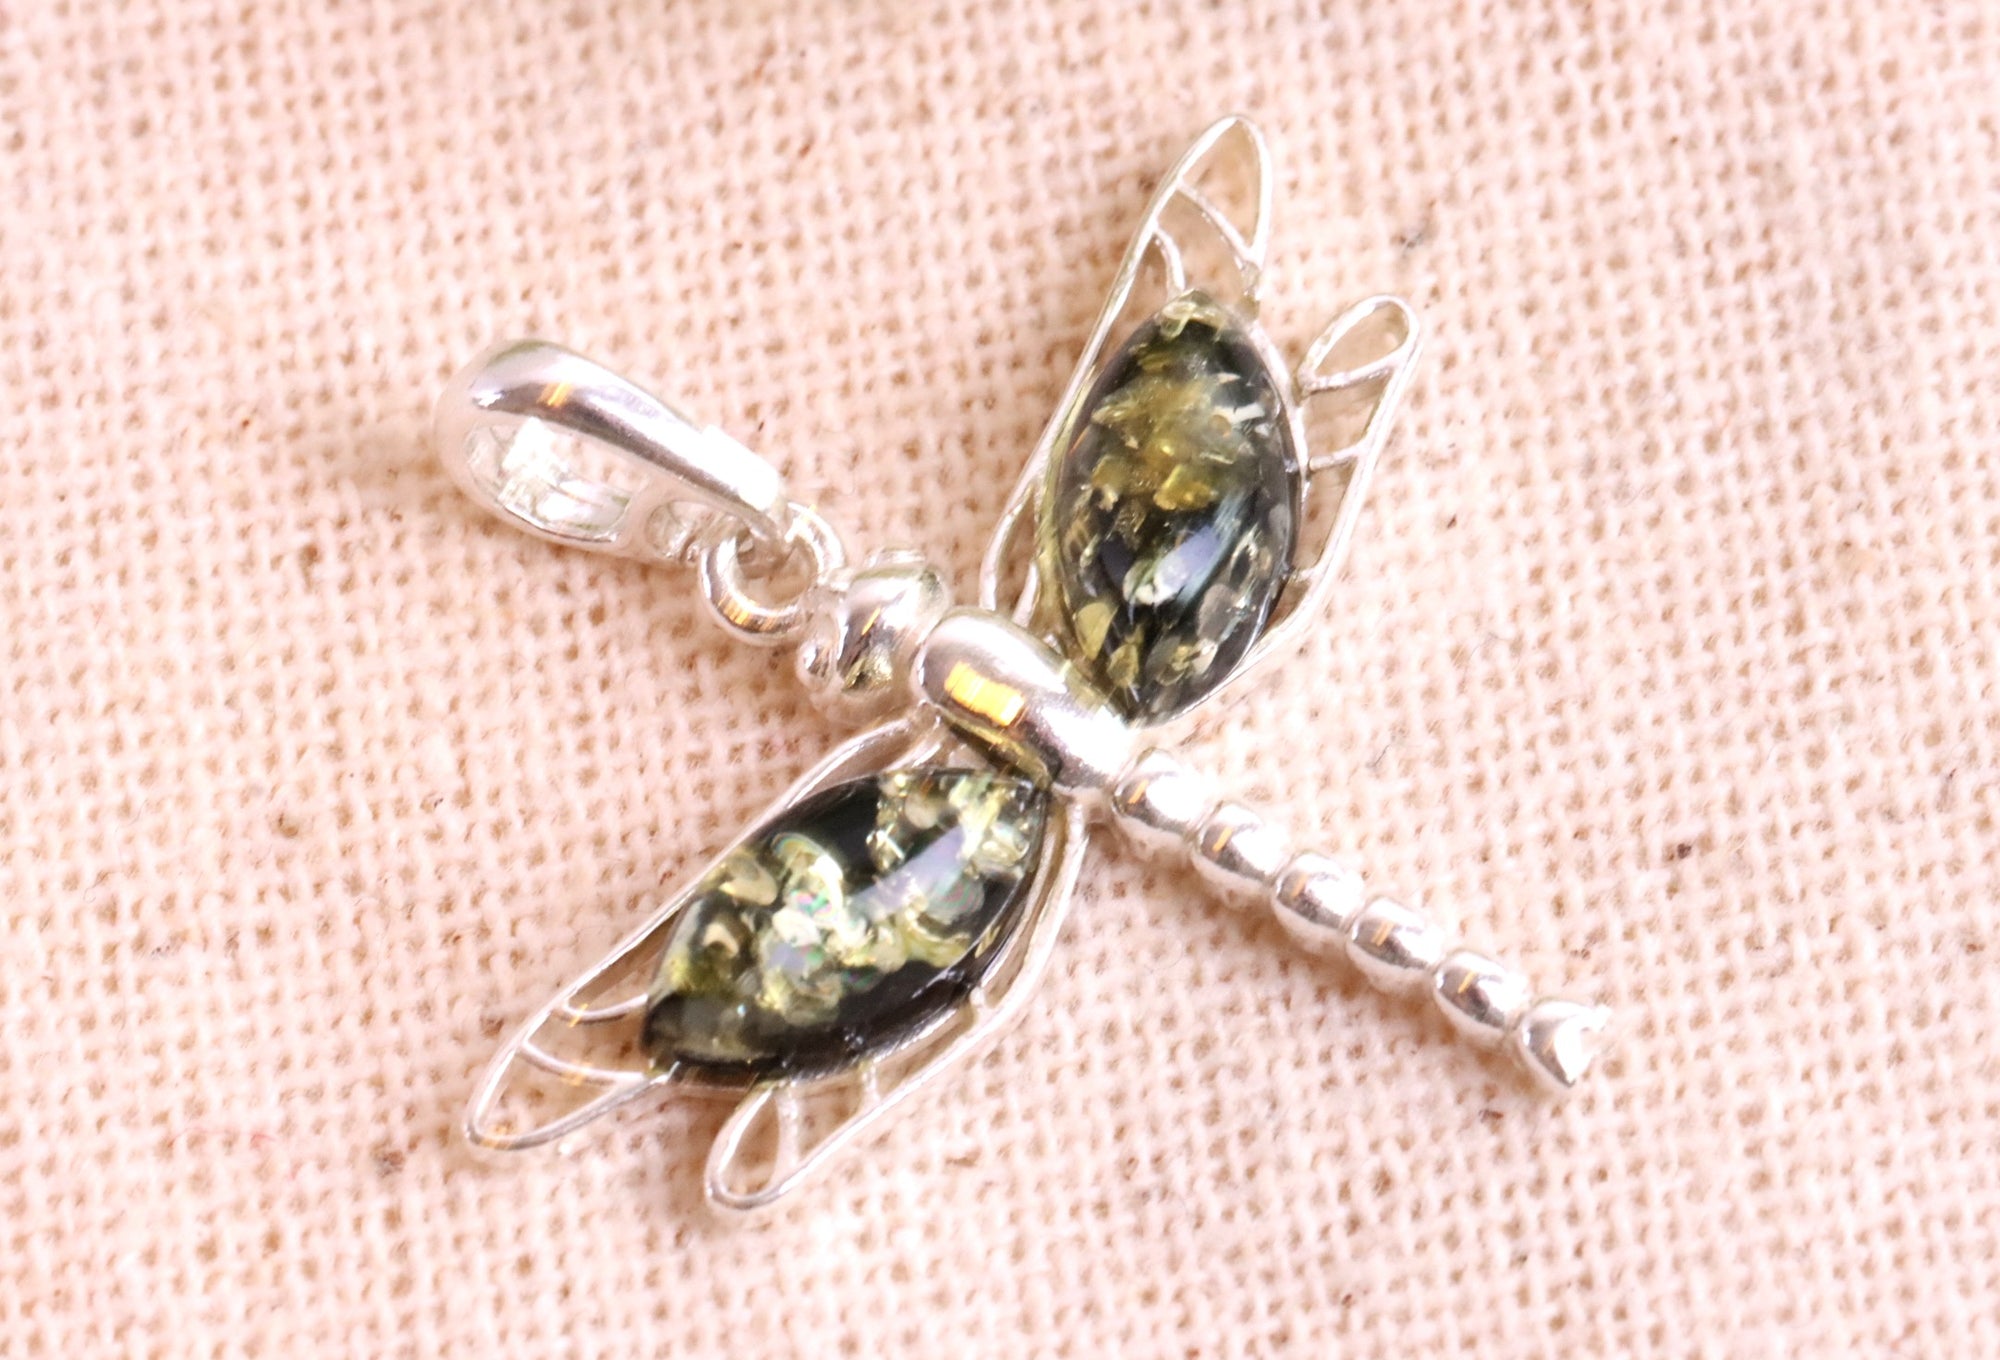 NEW !! Classic Dragonfly Pendant